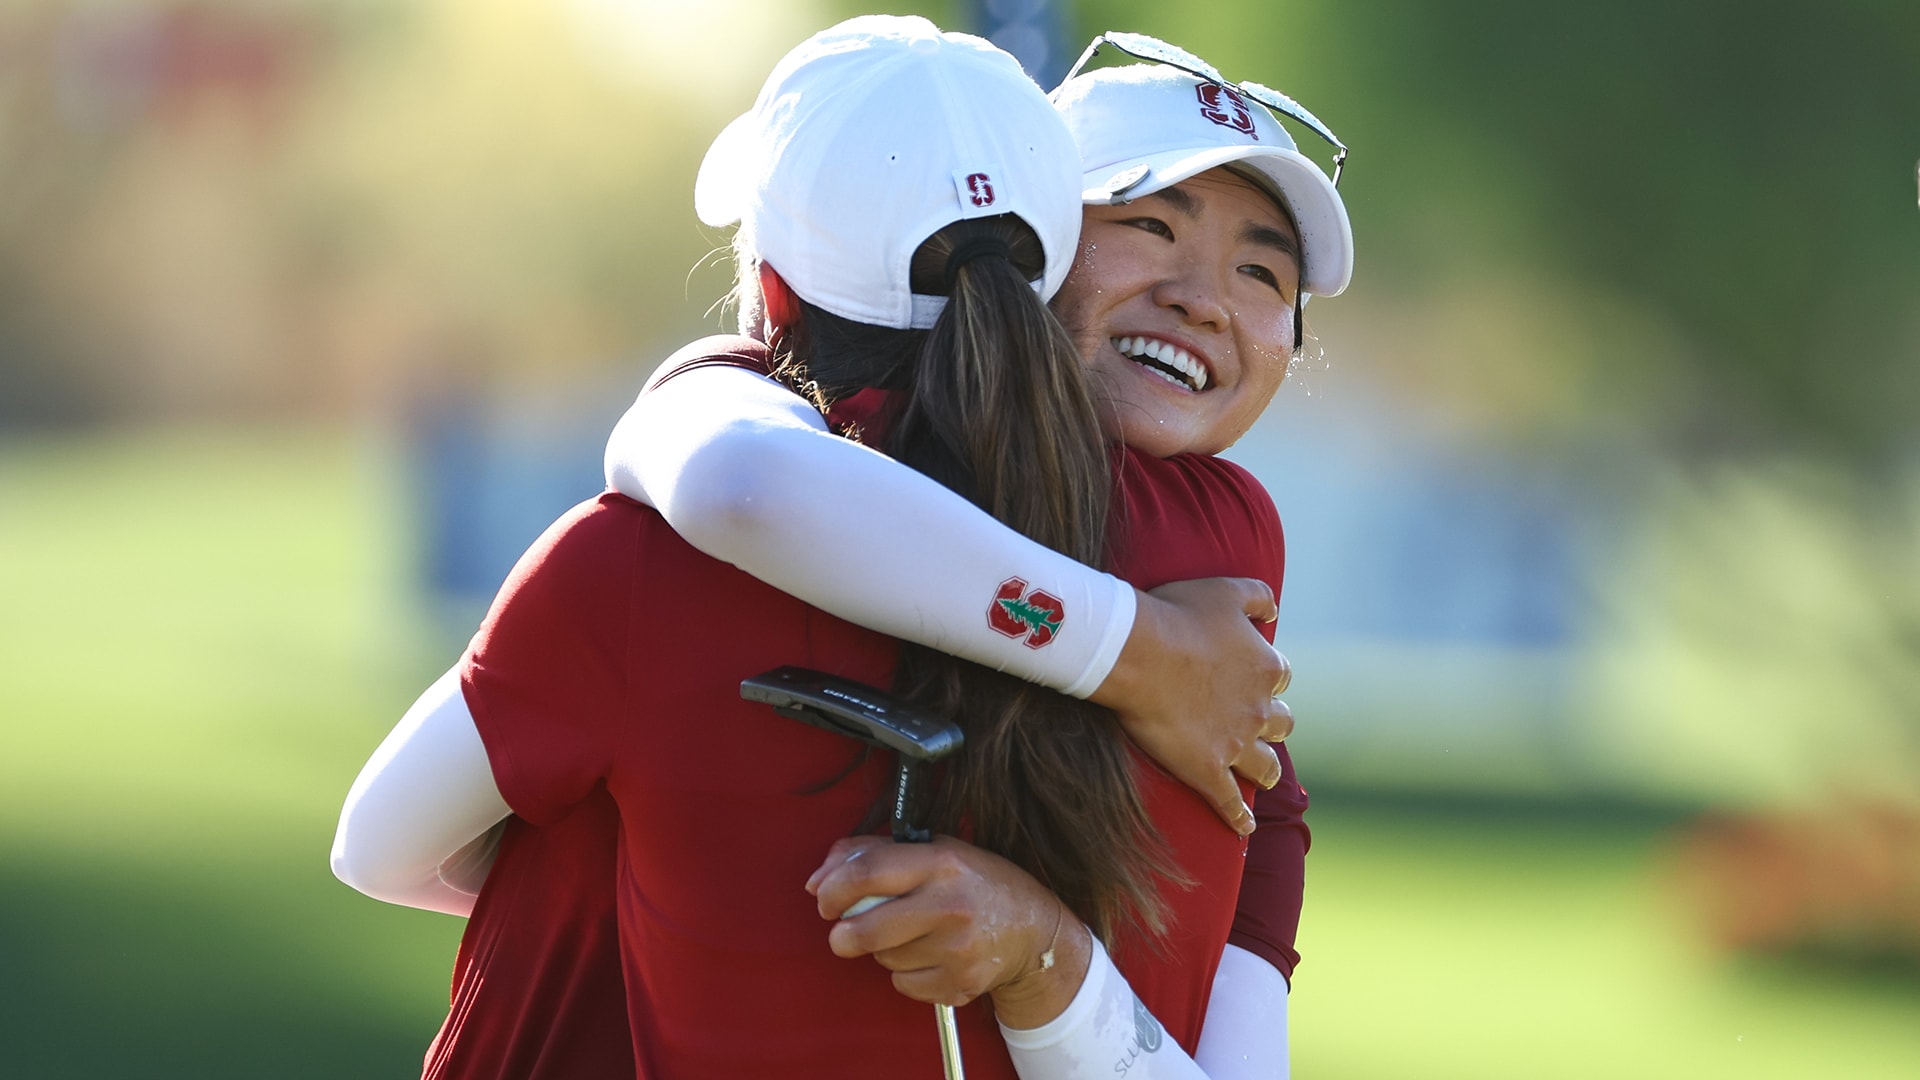 Podcast: Rose Zhang on turning pro, emotional Stanford goodbye, G.O.A.T. title